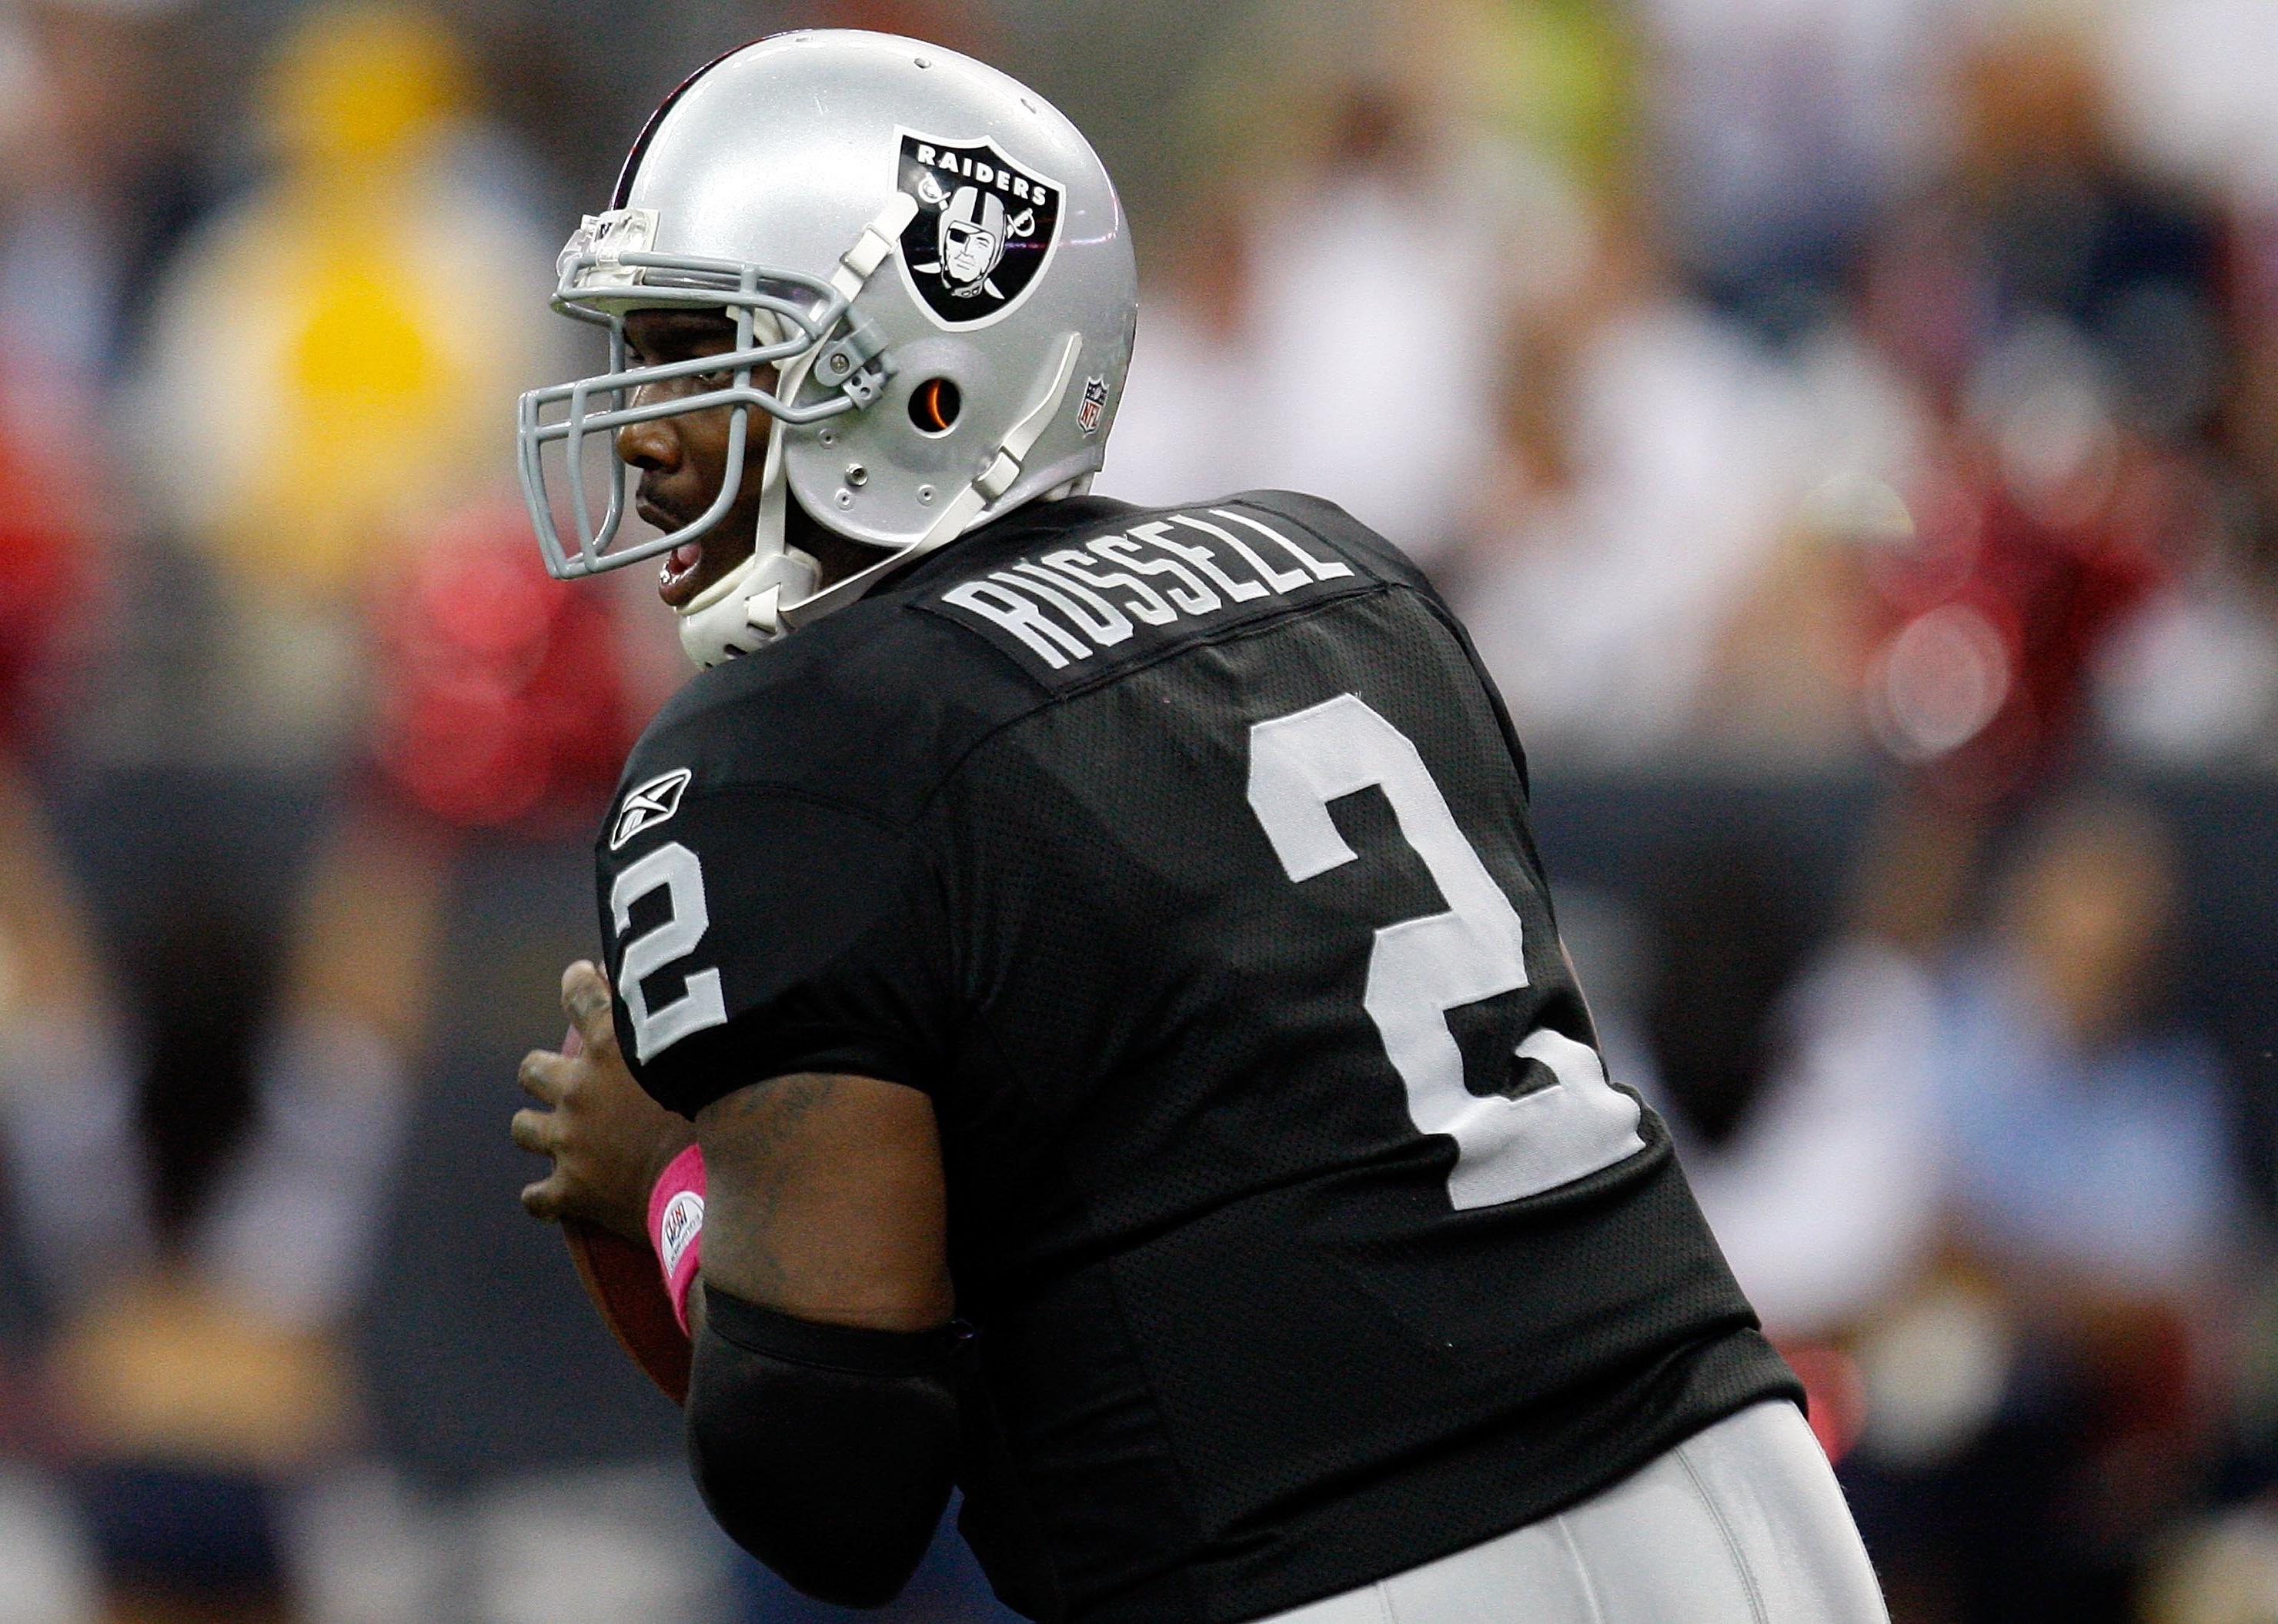 JaMarcus Russell of the Oakland Raiders at Reliant Stadium.